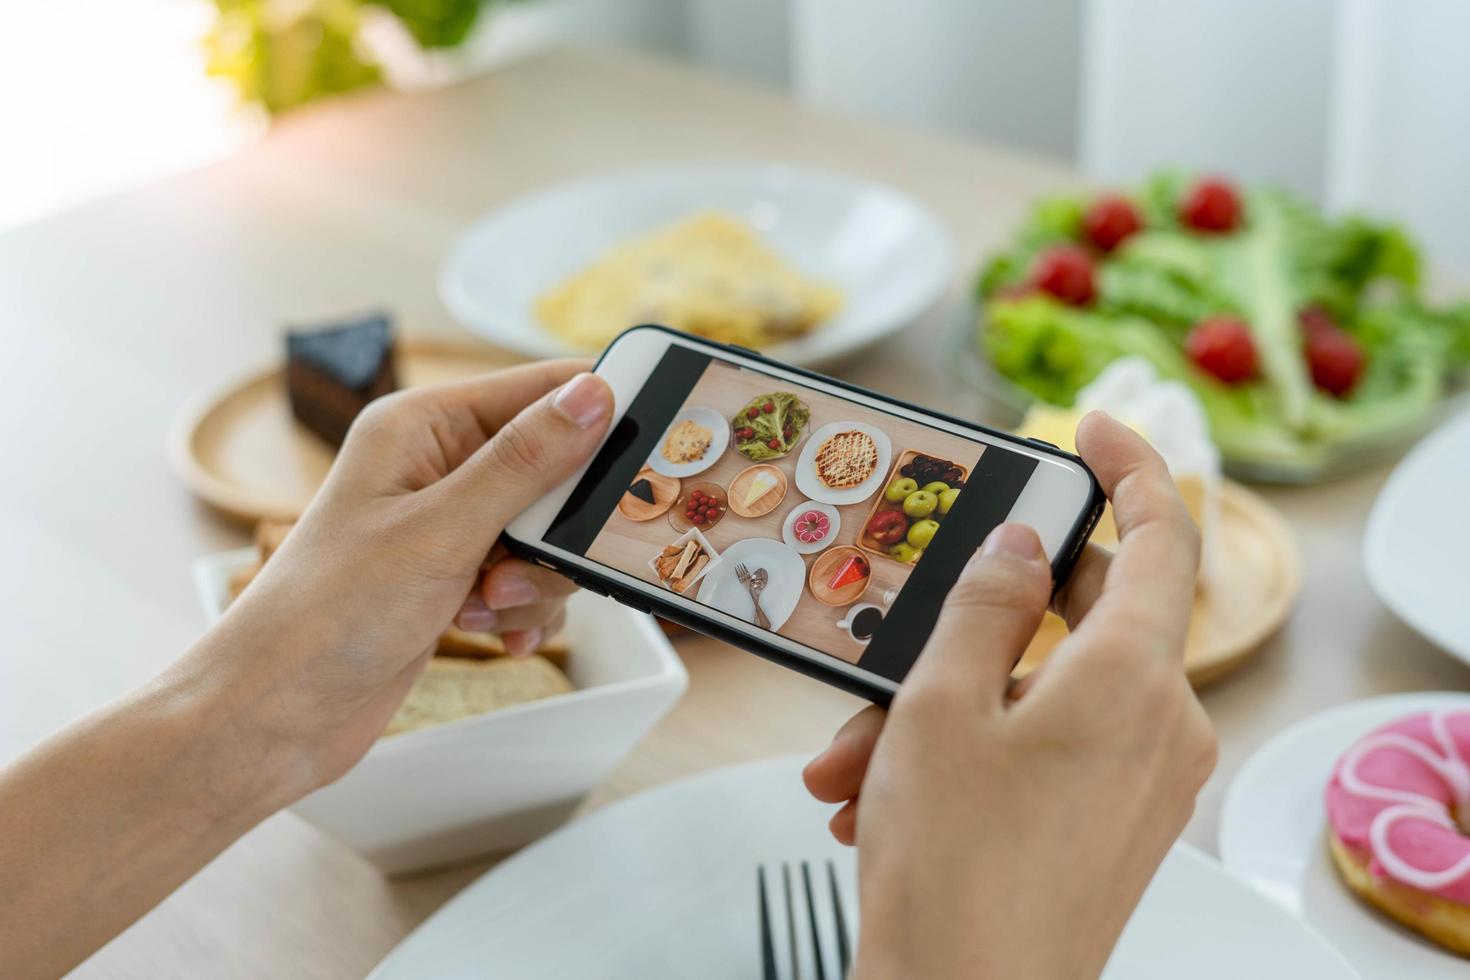 Women use mobile phones to take pictures of food or take live video on social networking applications. Food for dinner looks appetizing. Photography and take picture for review food concepts photo